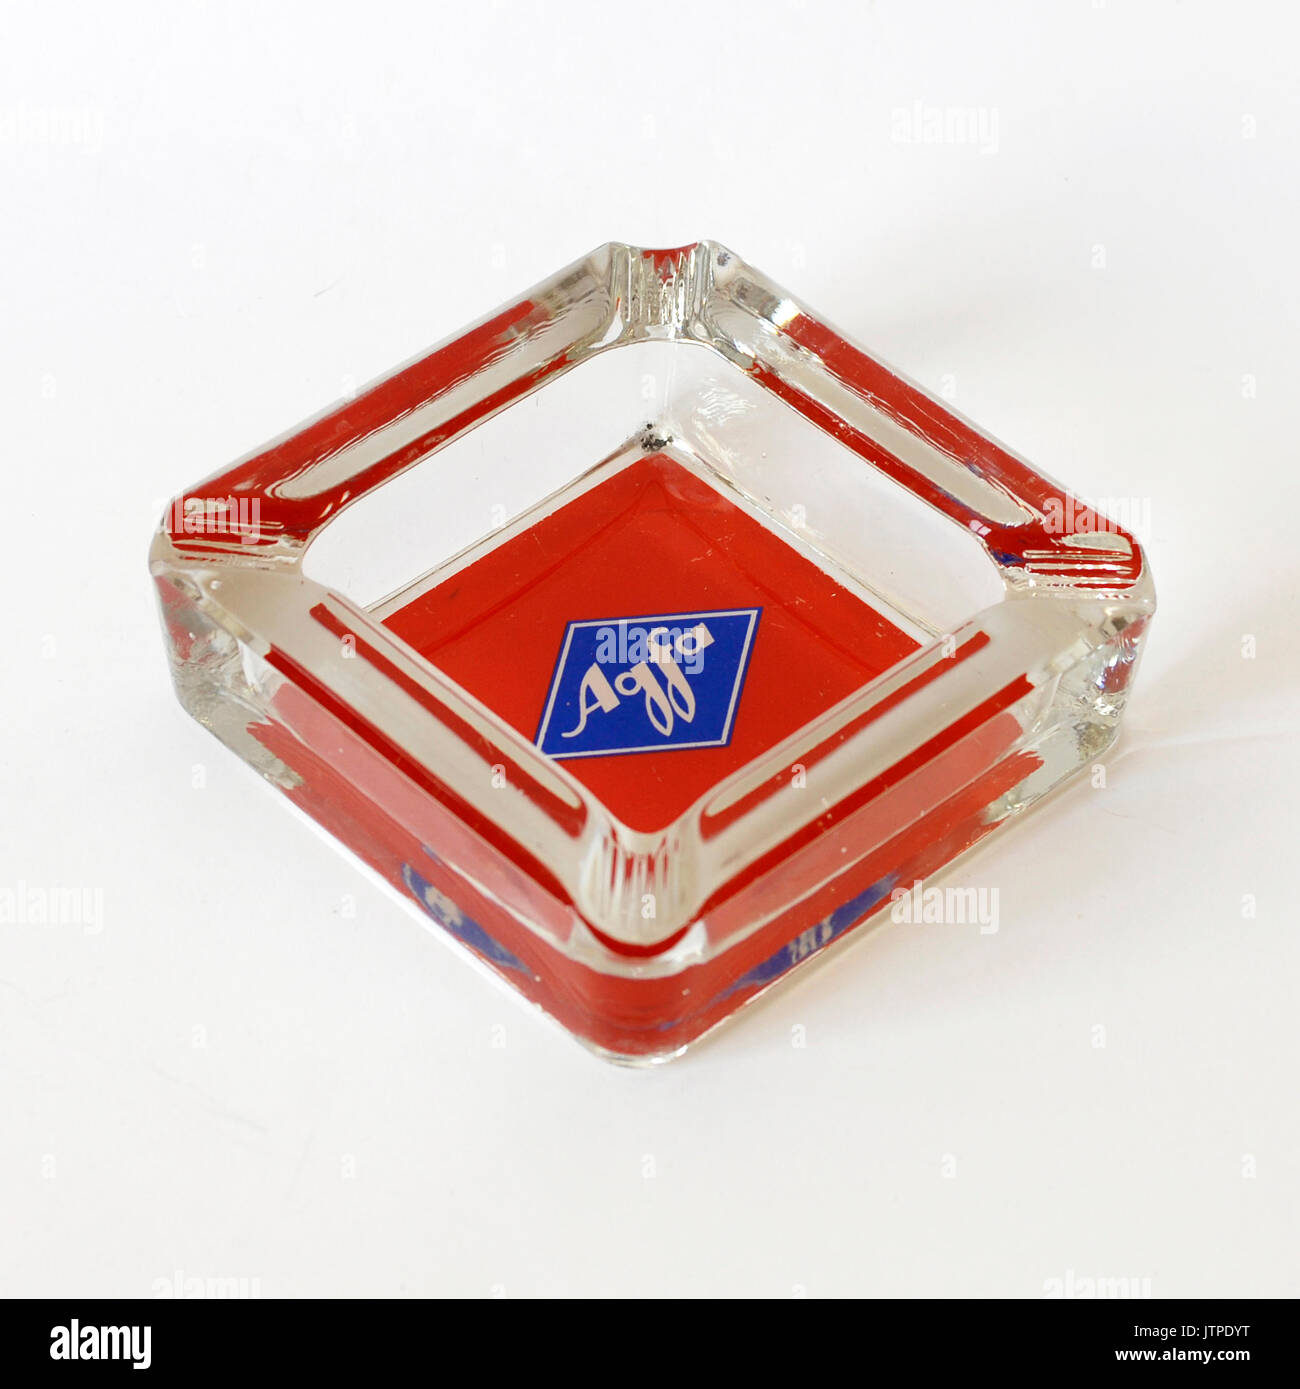 Vintage glass ashtray with AGFA photography logo, Made in Germany Stock Photo